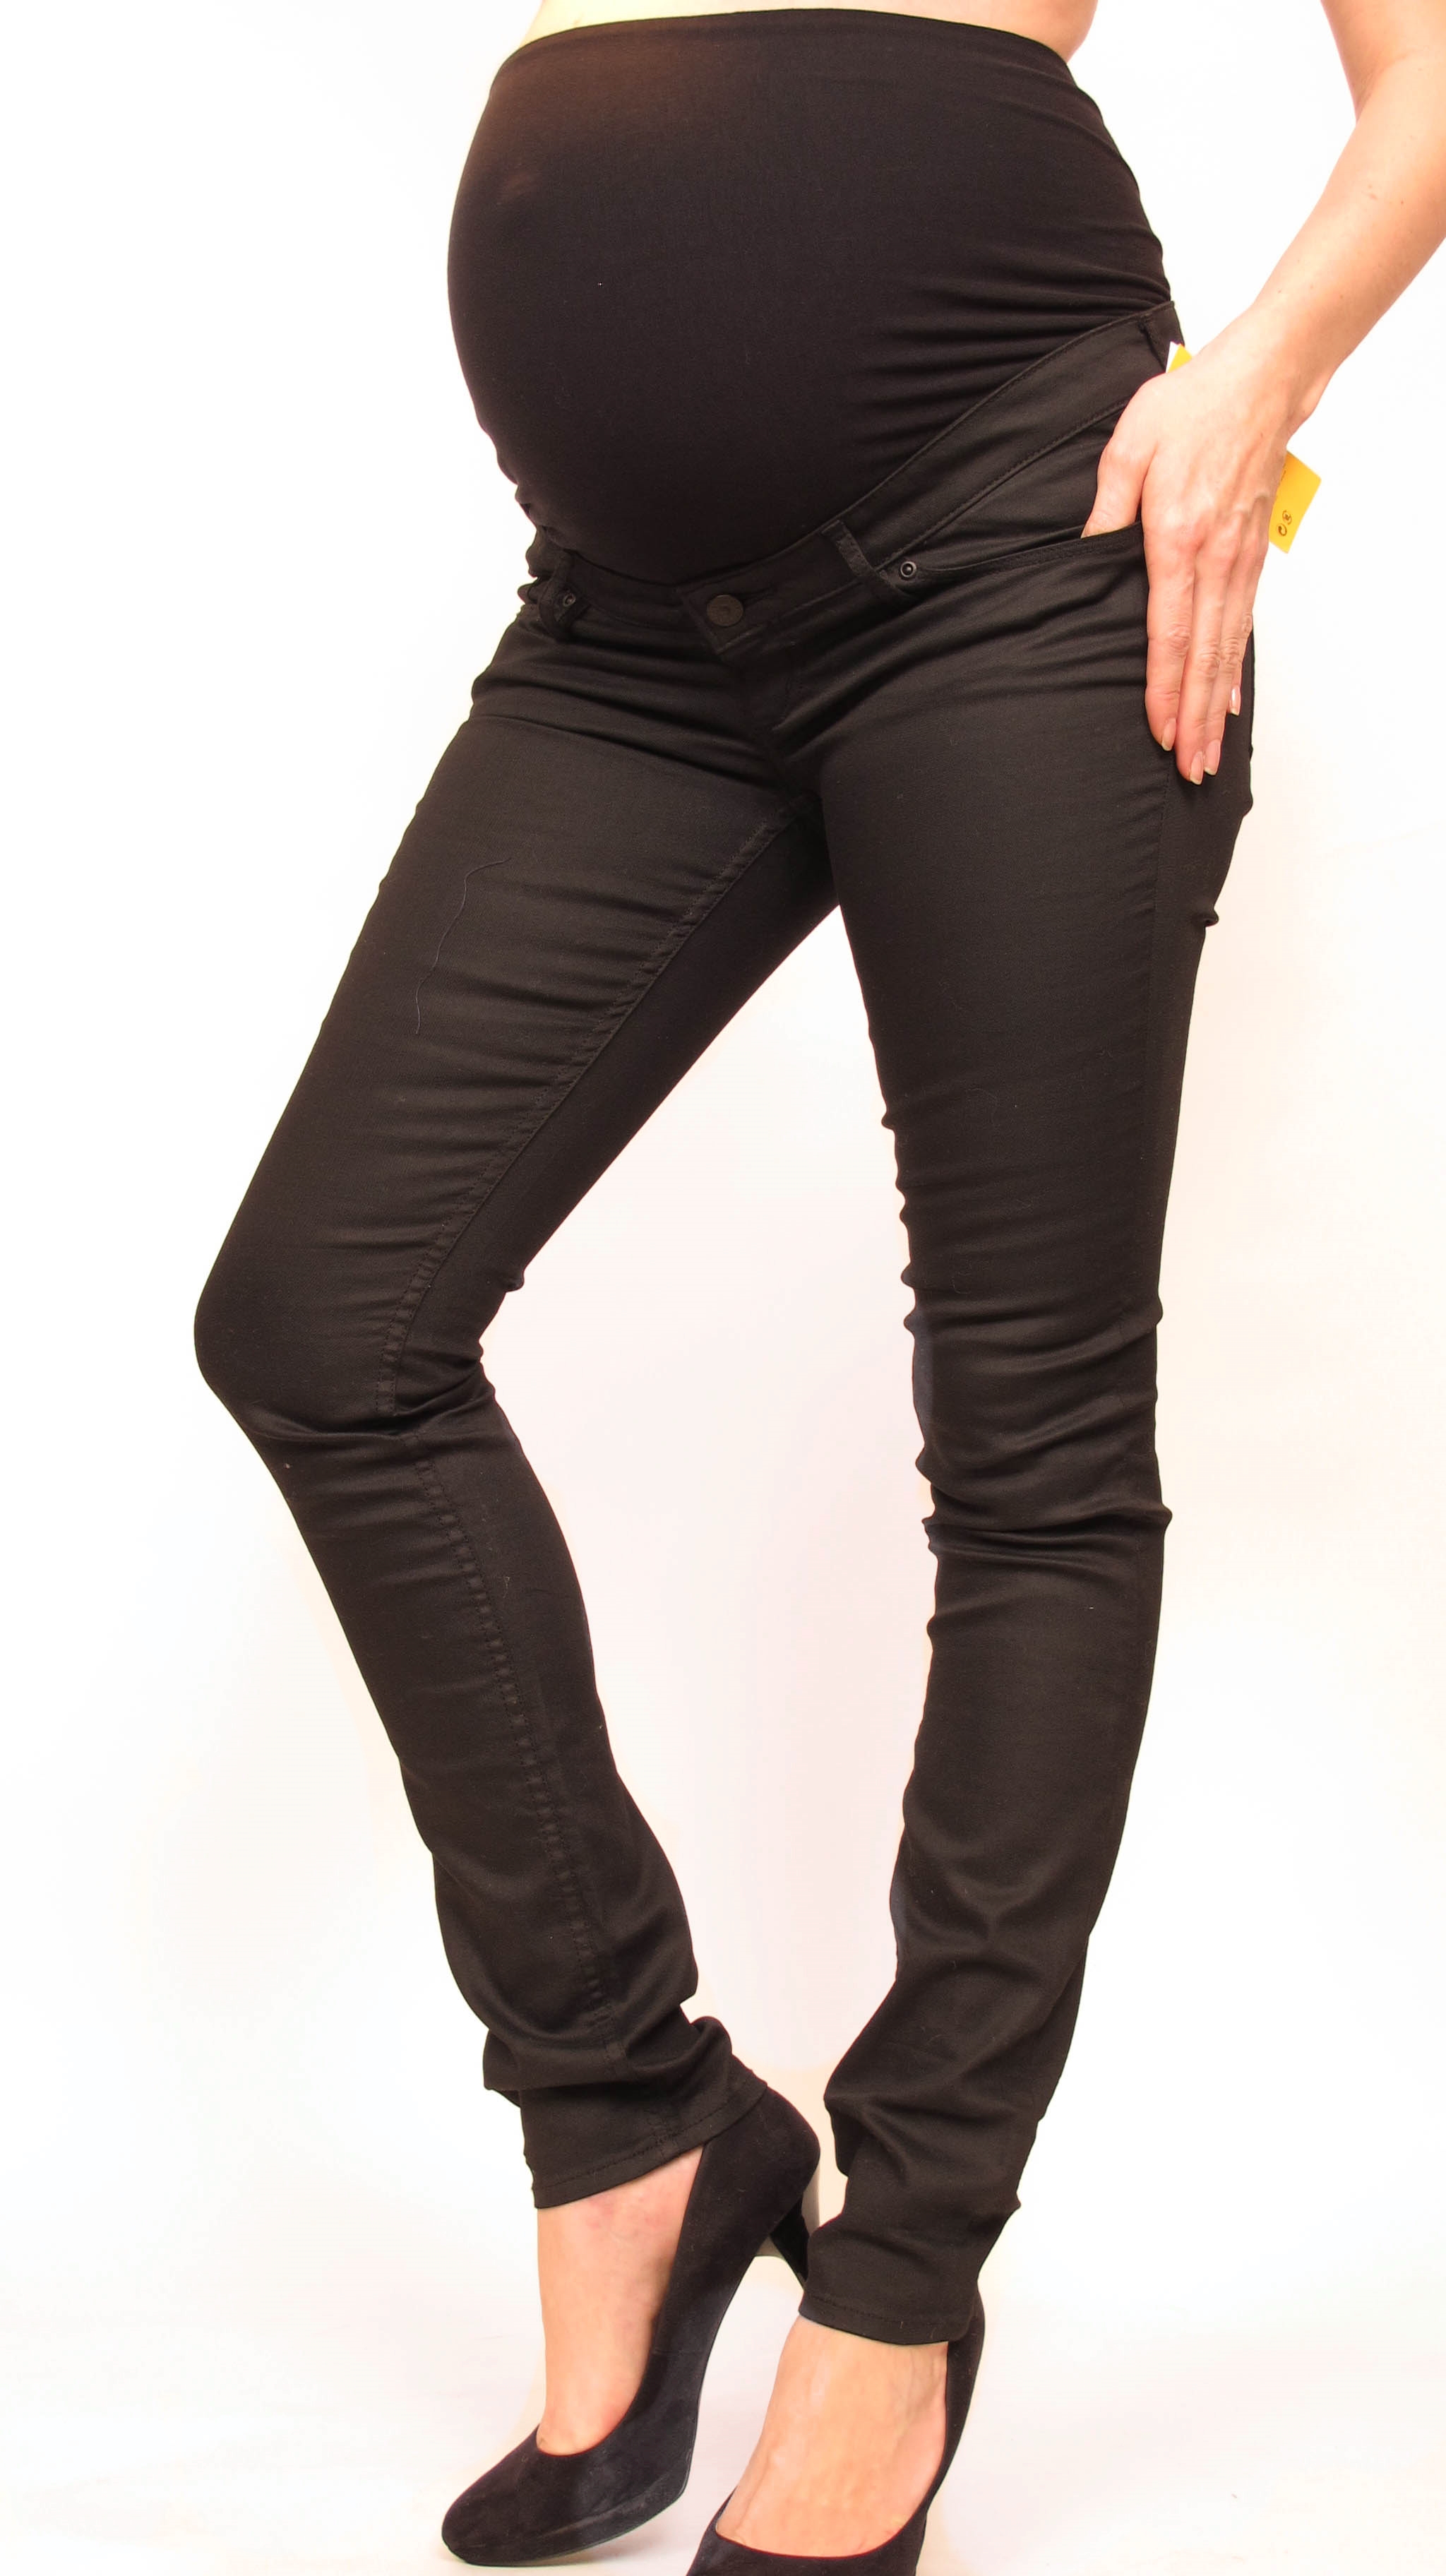 discount 63% Black S H&M MAMA maternity jeans WOMEN FASHION Jeans Maternity jeans Basic 